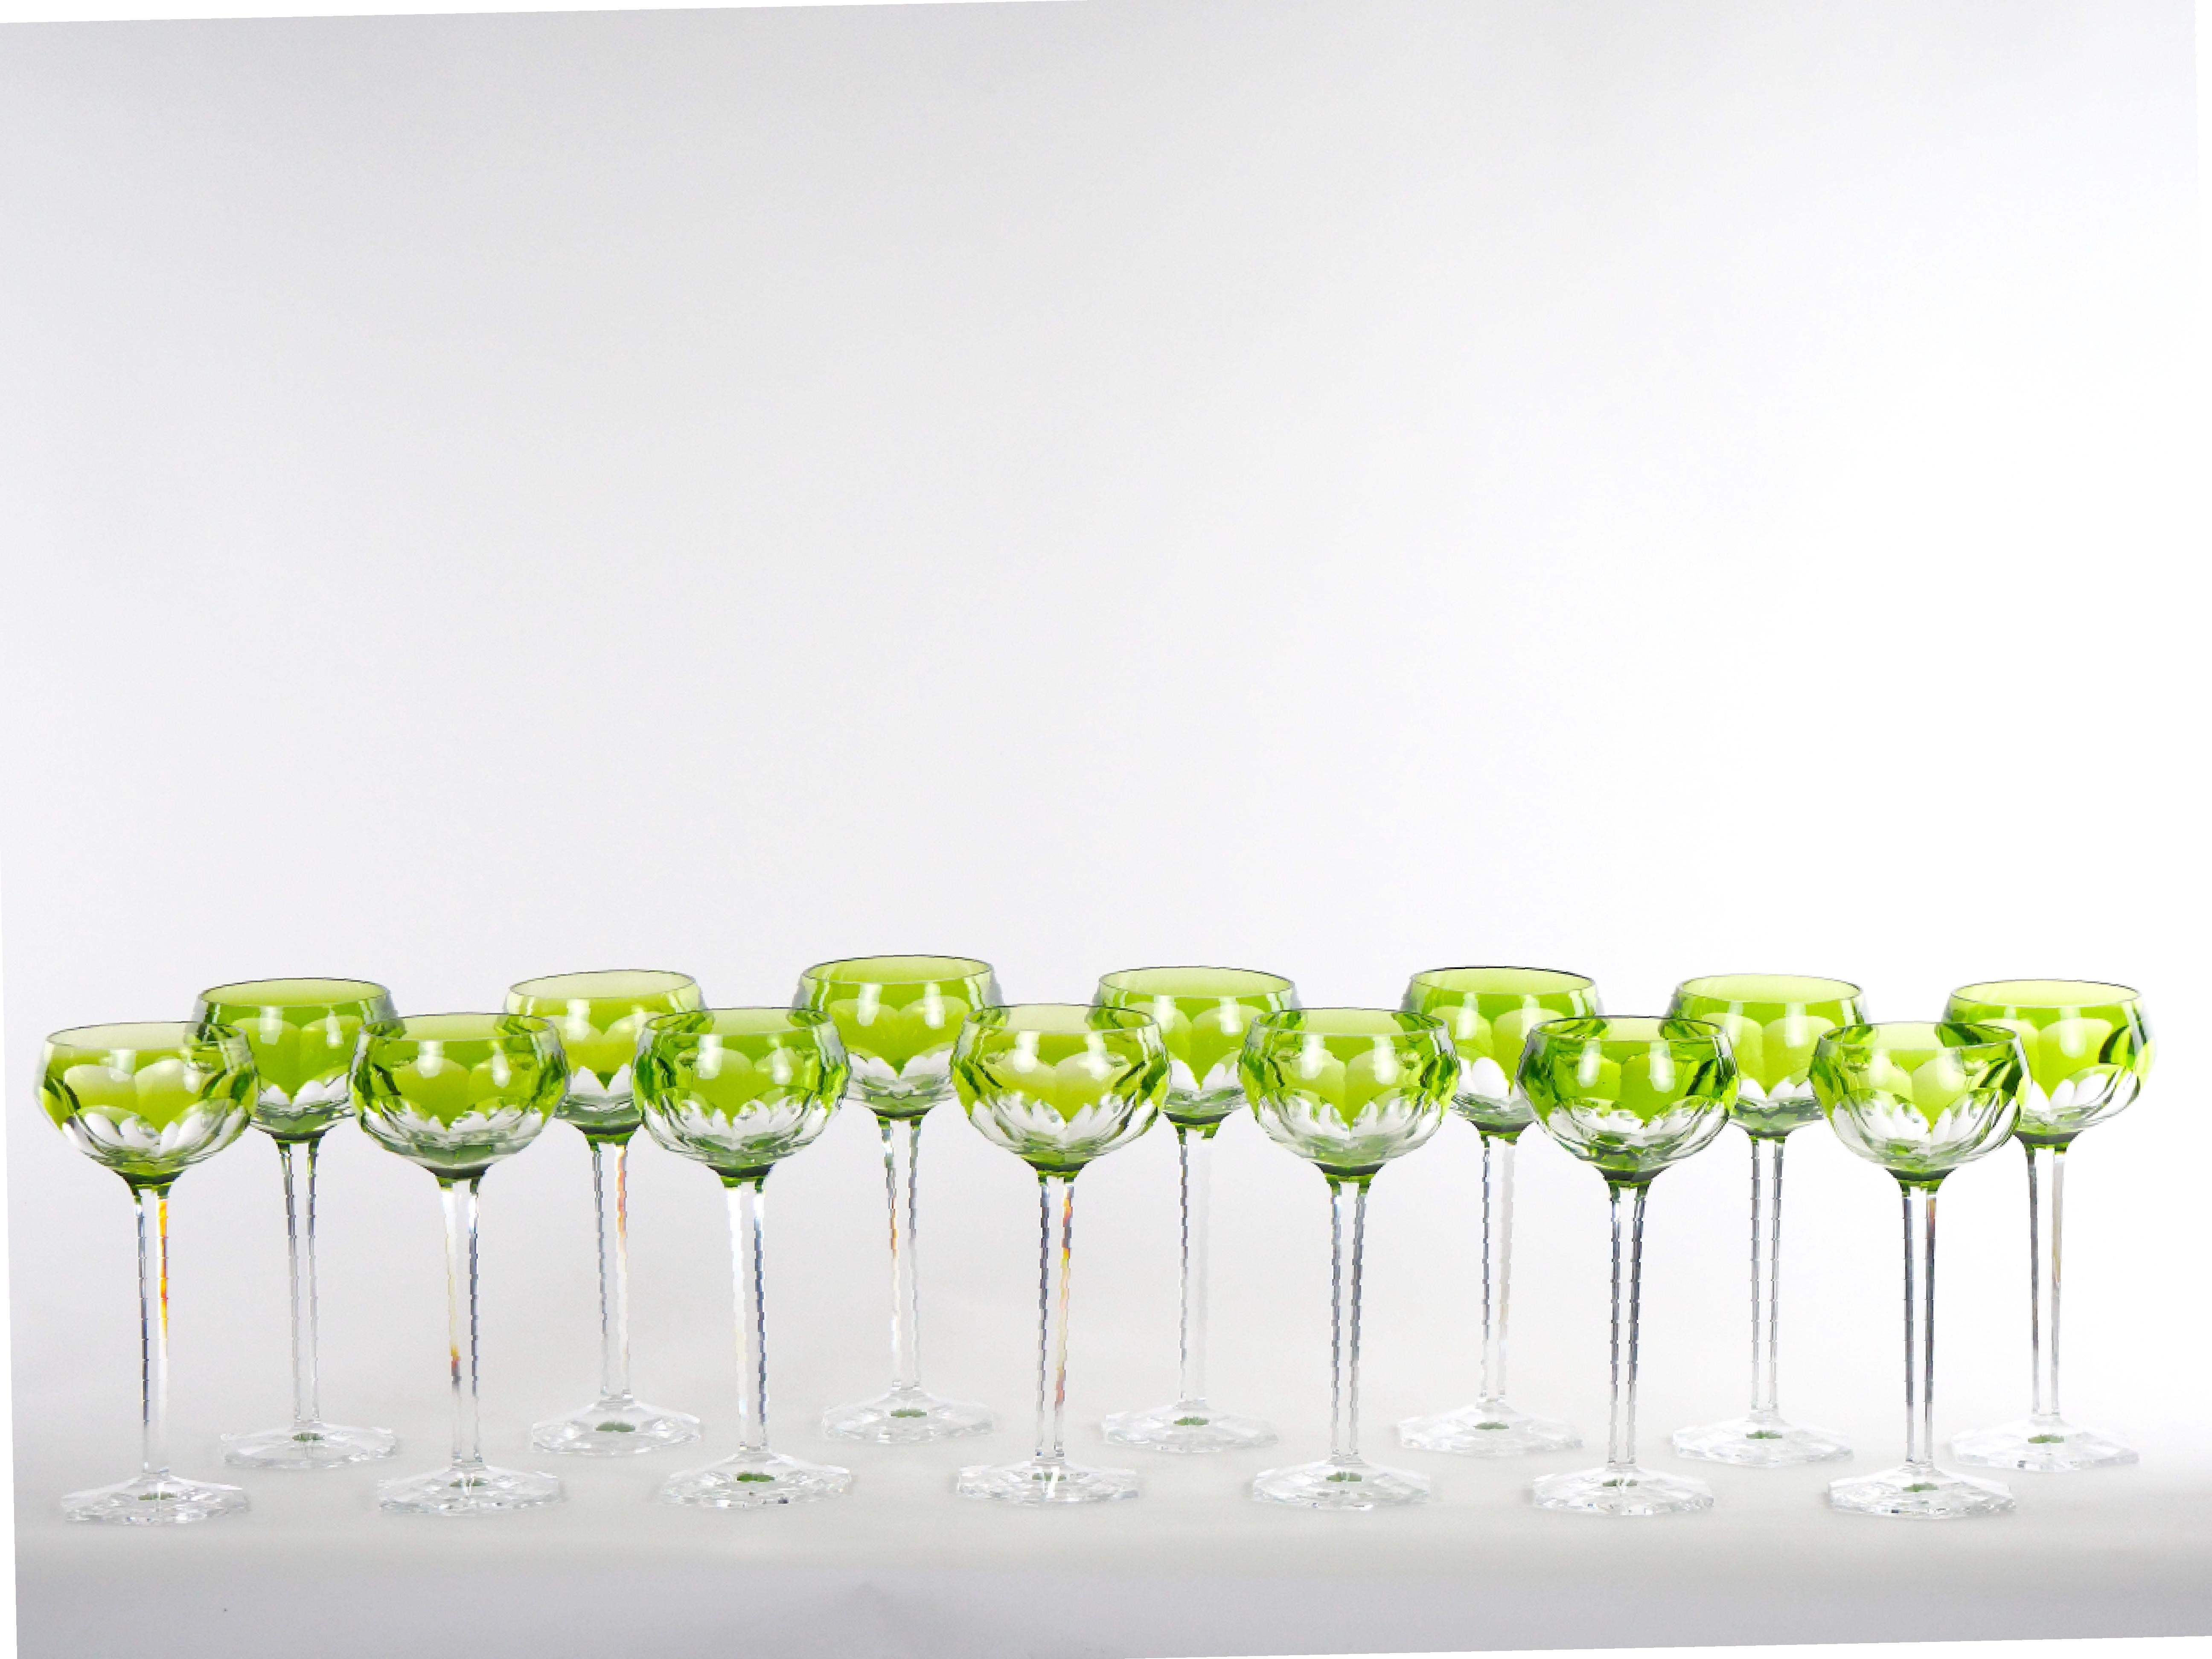 Exquisite Moser cut crystal paneled decorated design tableware / barware wine goblet service for 14 people. These are a dramatic and unusual pattern of handblown crystal goblets by Moser. The subtle apple green shaded top to clear, highlights the